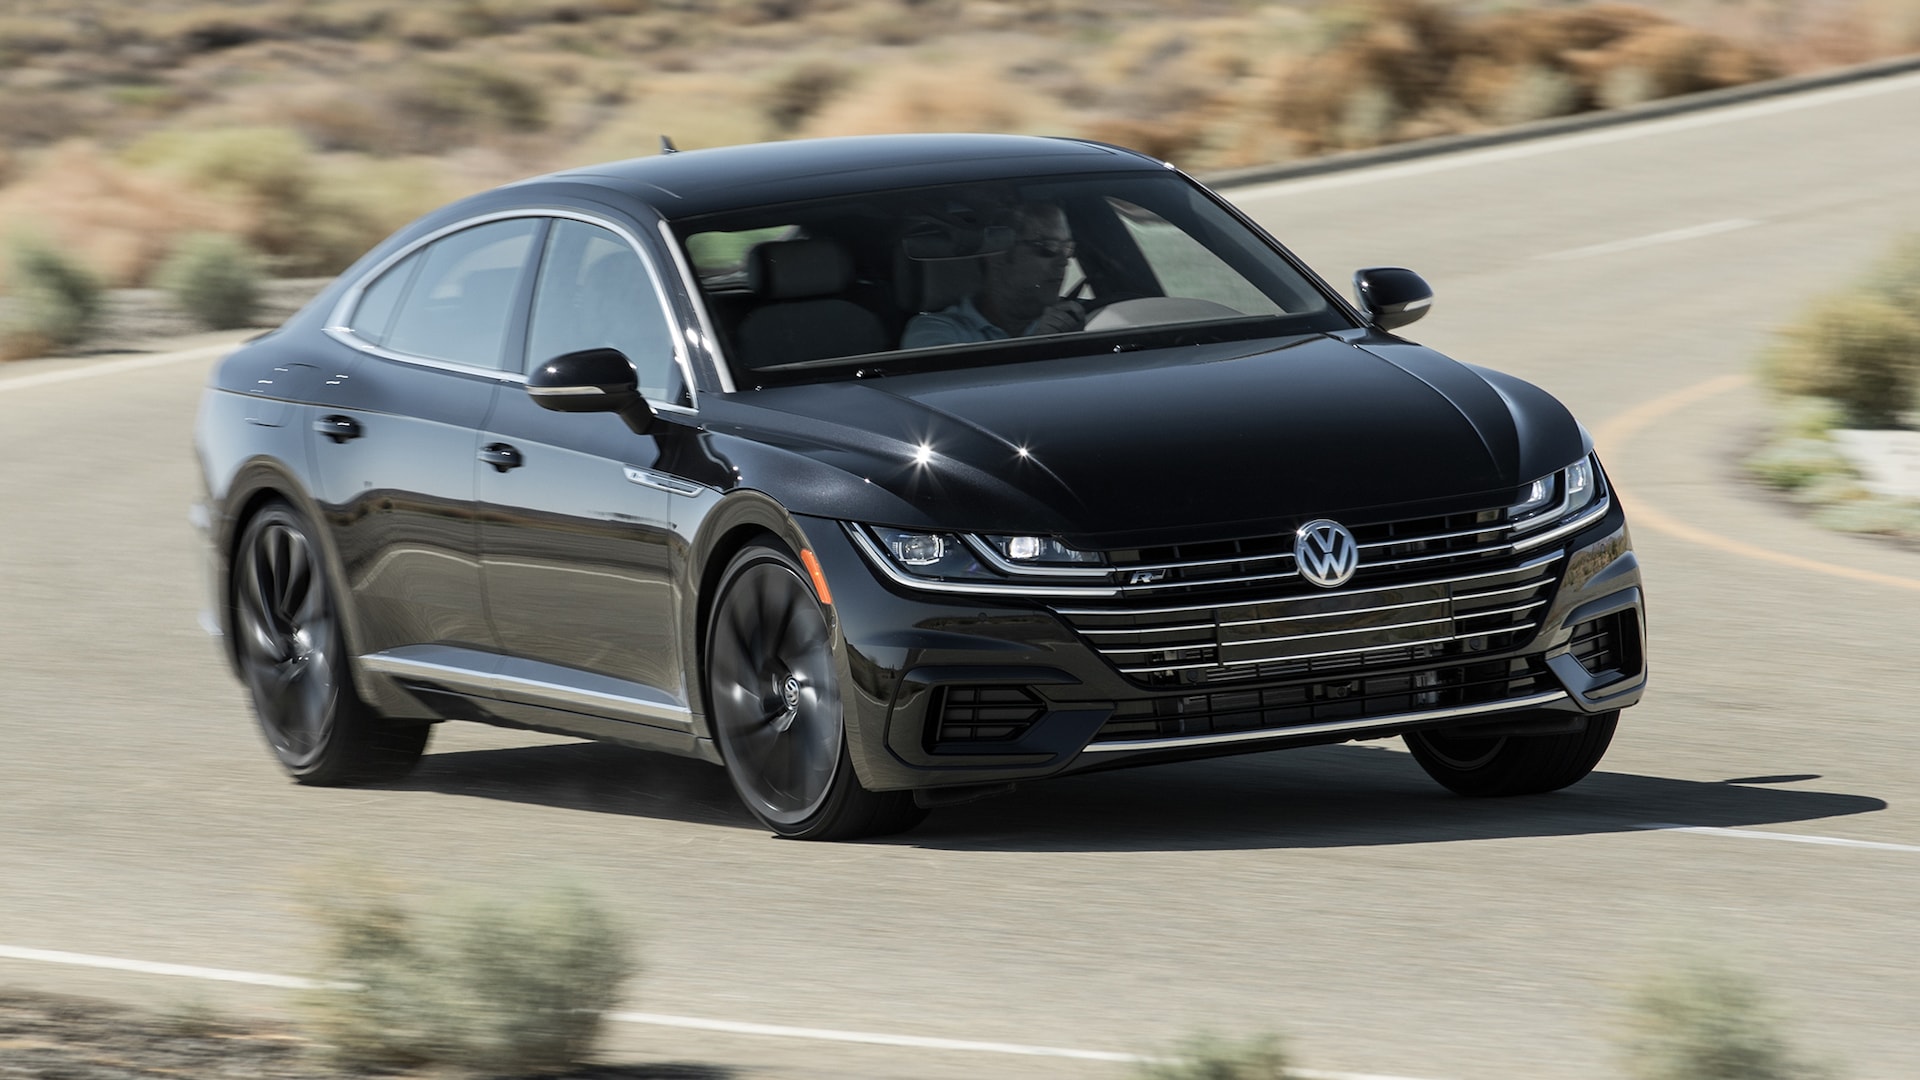 Volkswagen Arteon Pros and Cons Review: More Style Than Substance